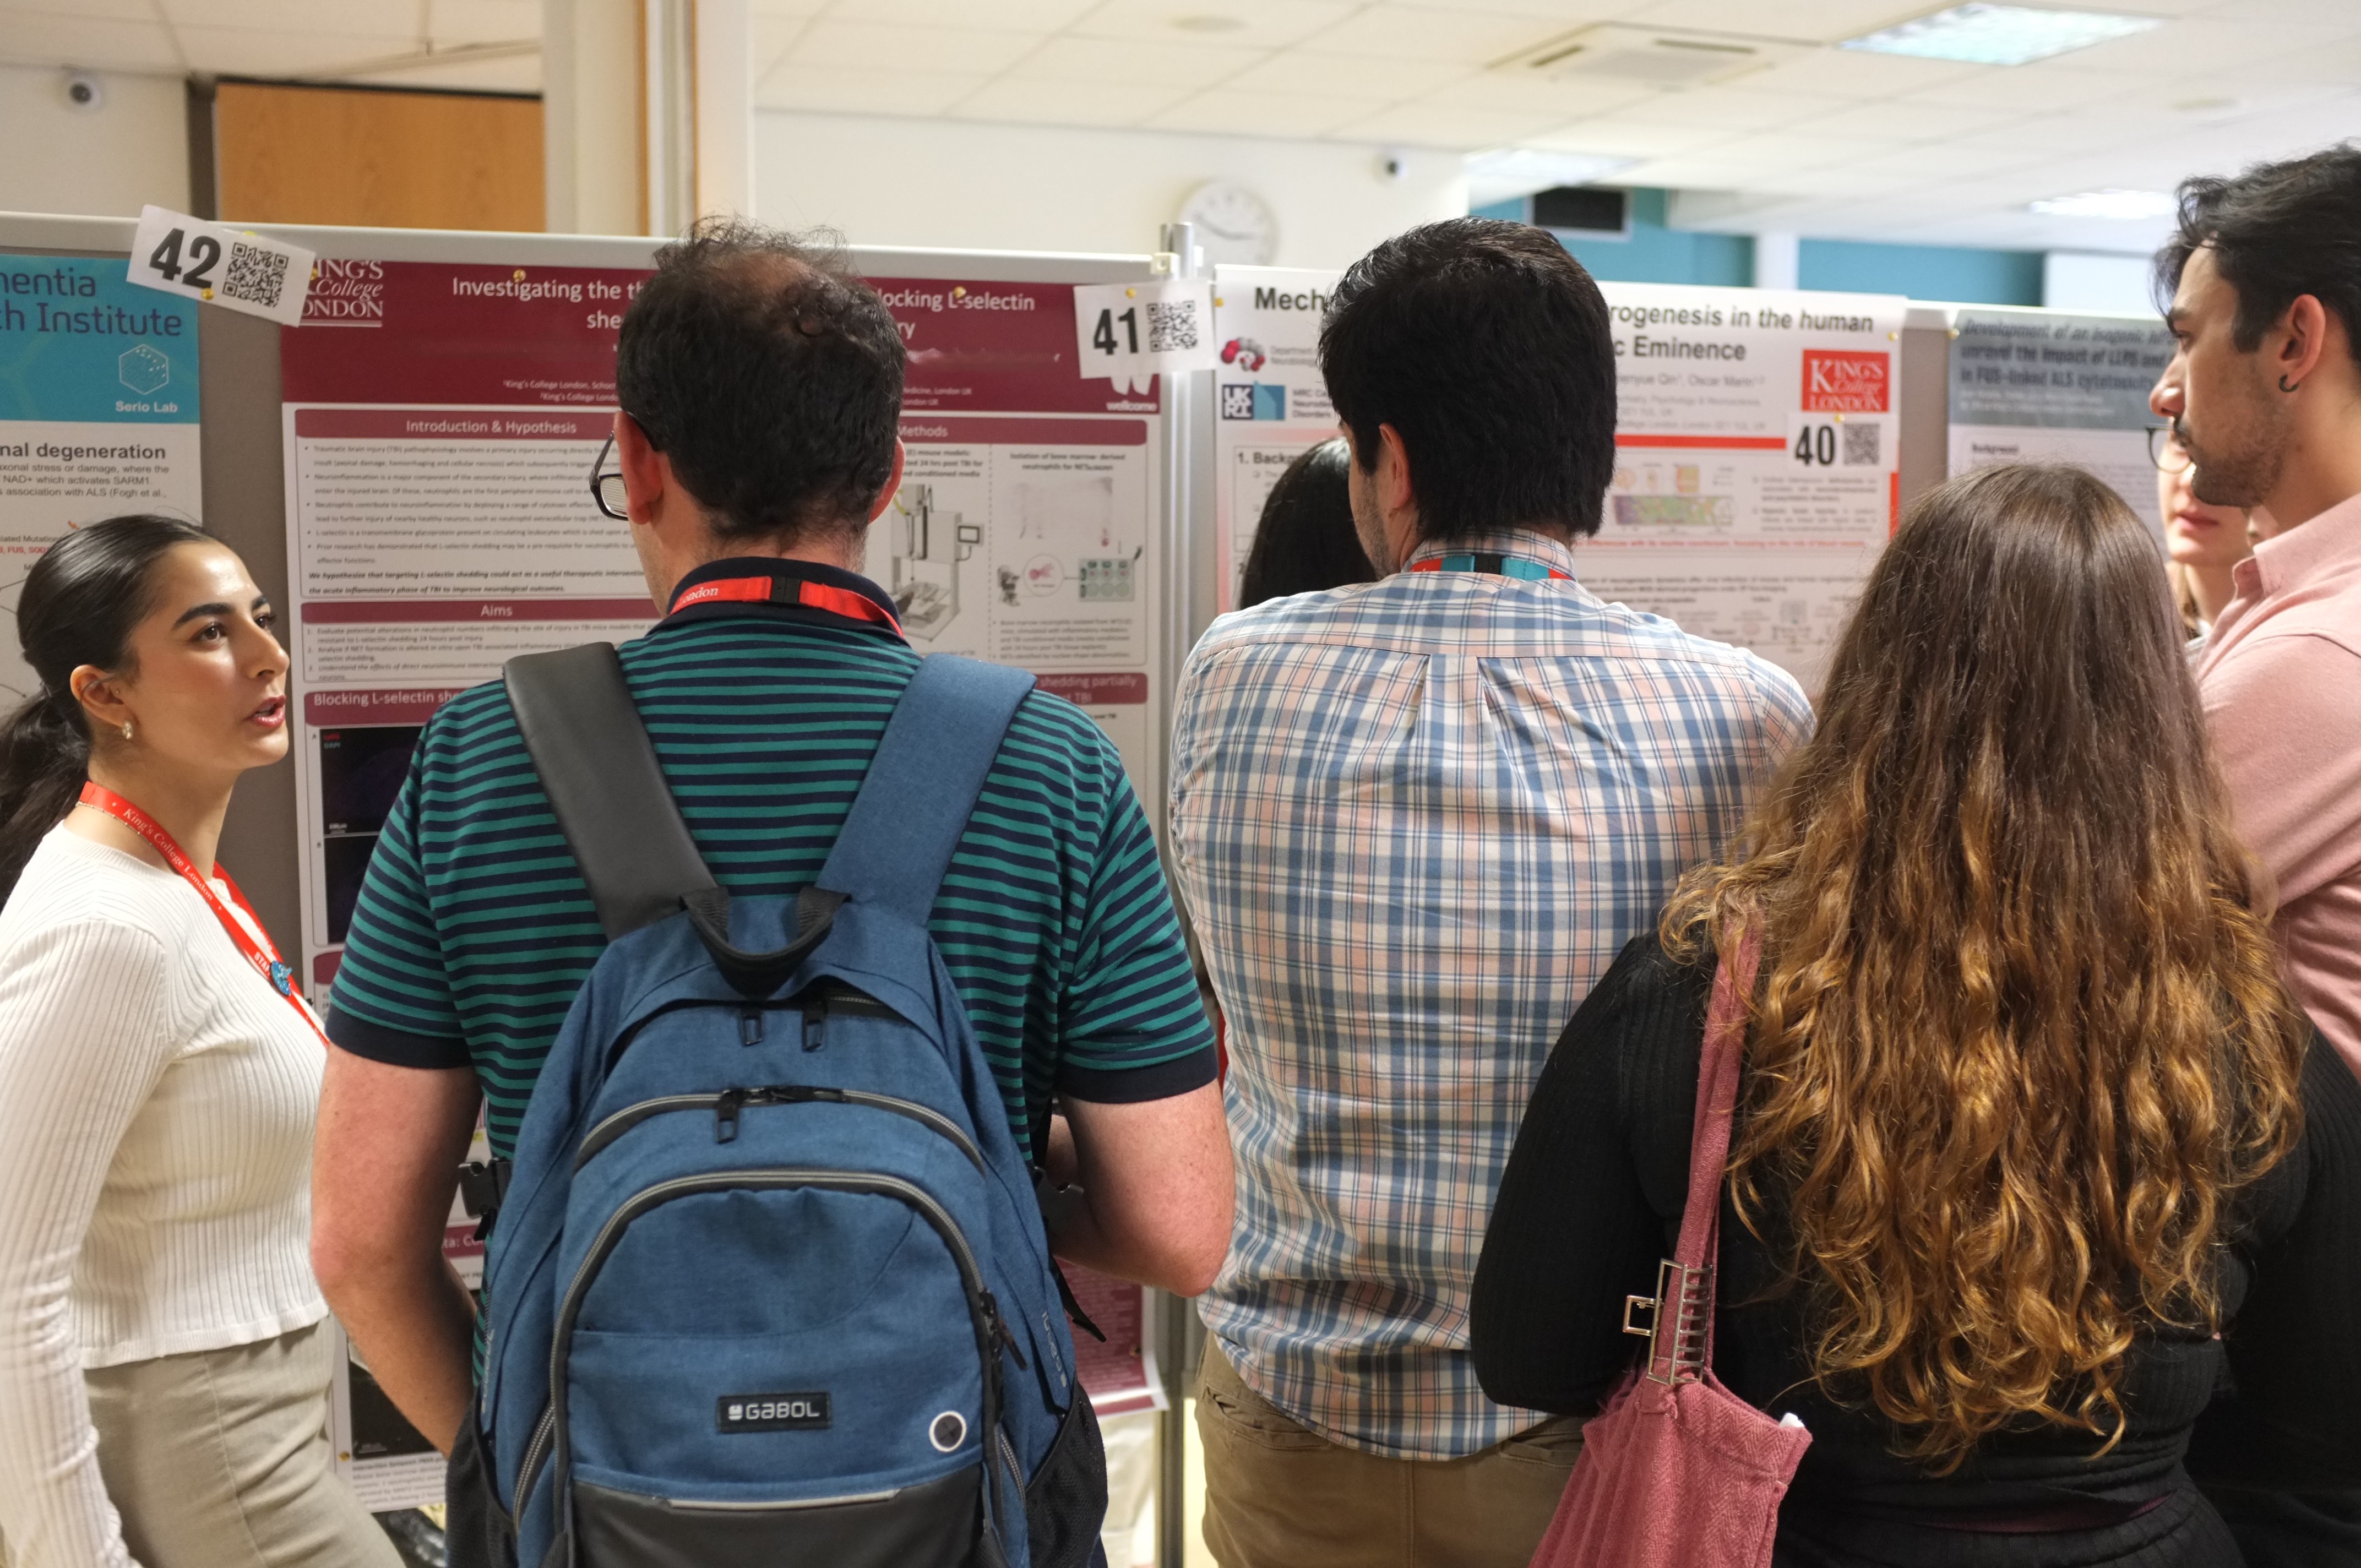 PhD student presenting their work in poster format to attendees